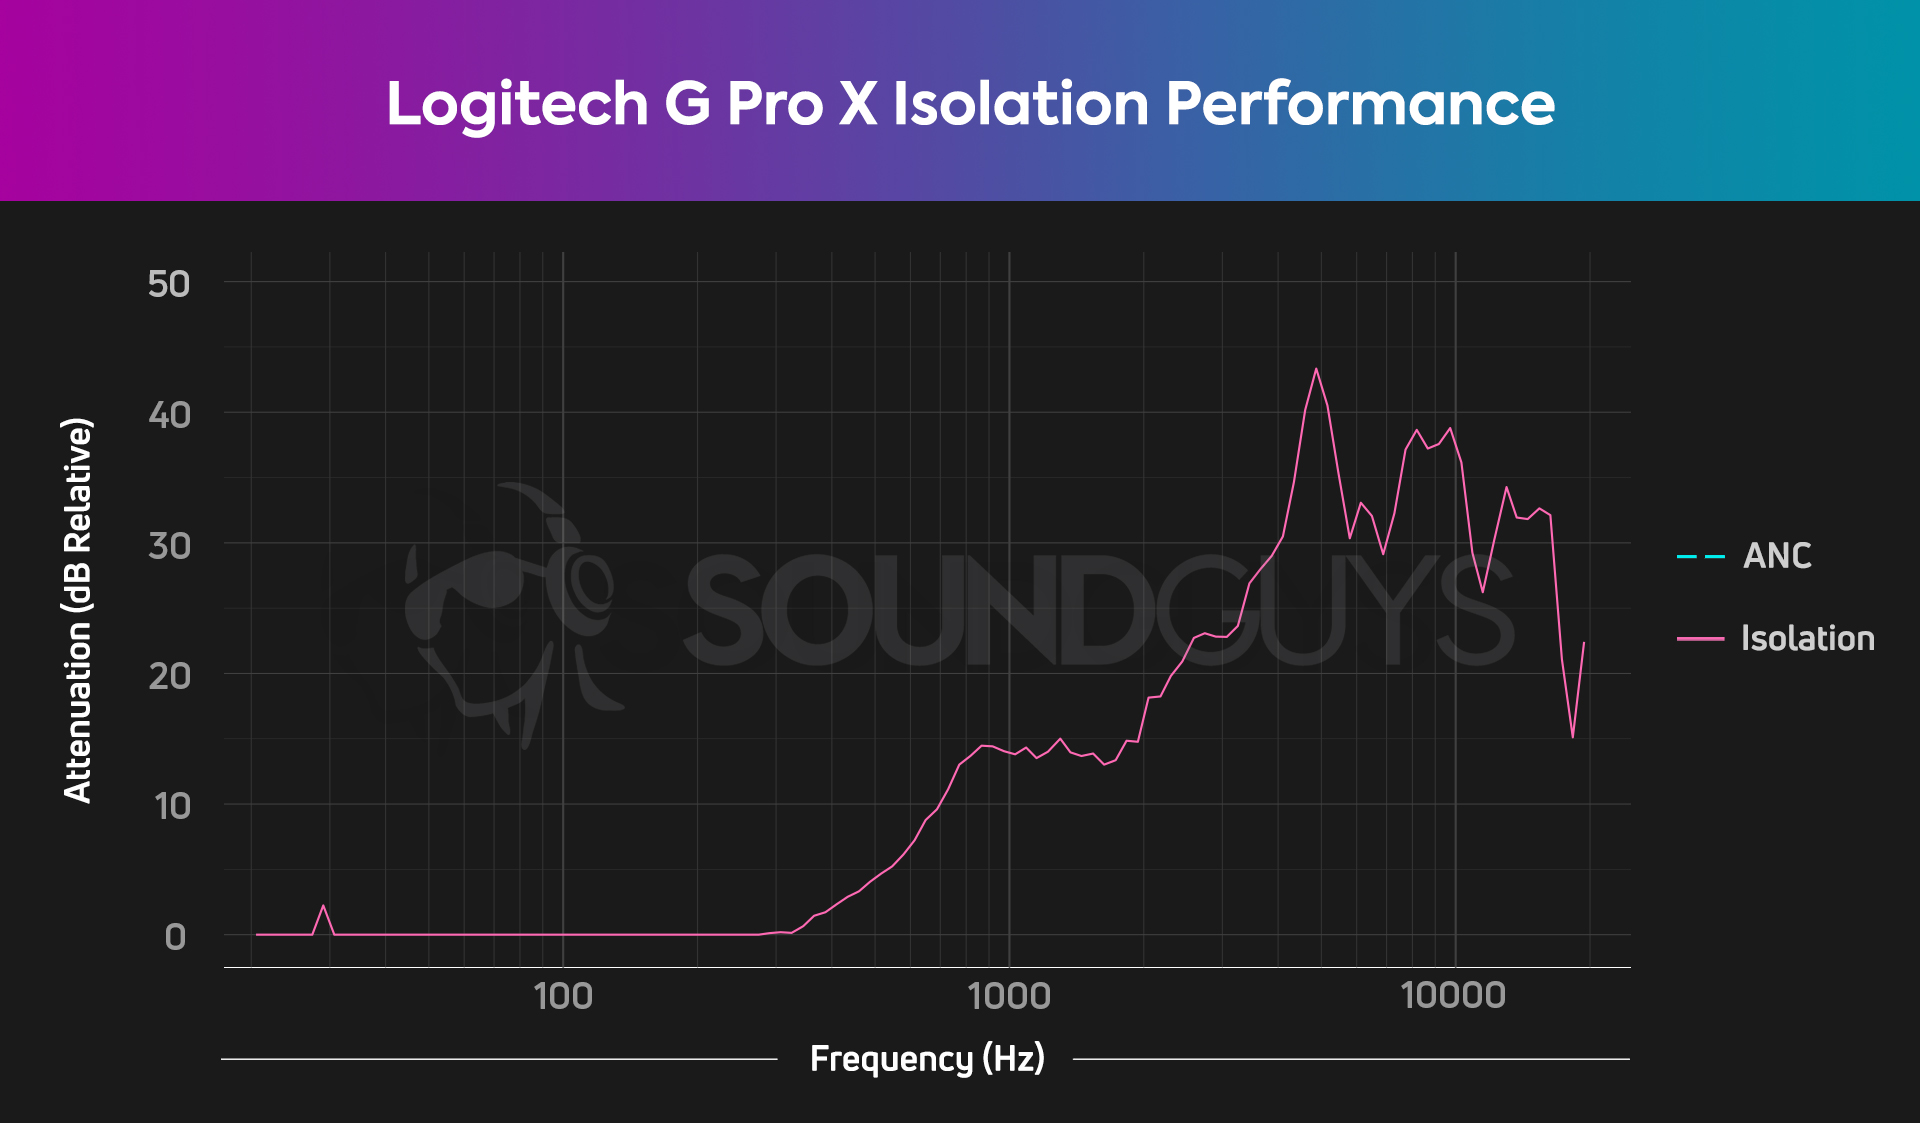 An isolation chart for the Logitech G pro X using the new SoundGuys test head, which shows average isolation.